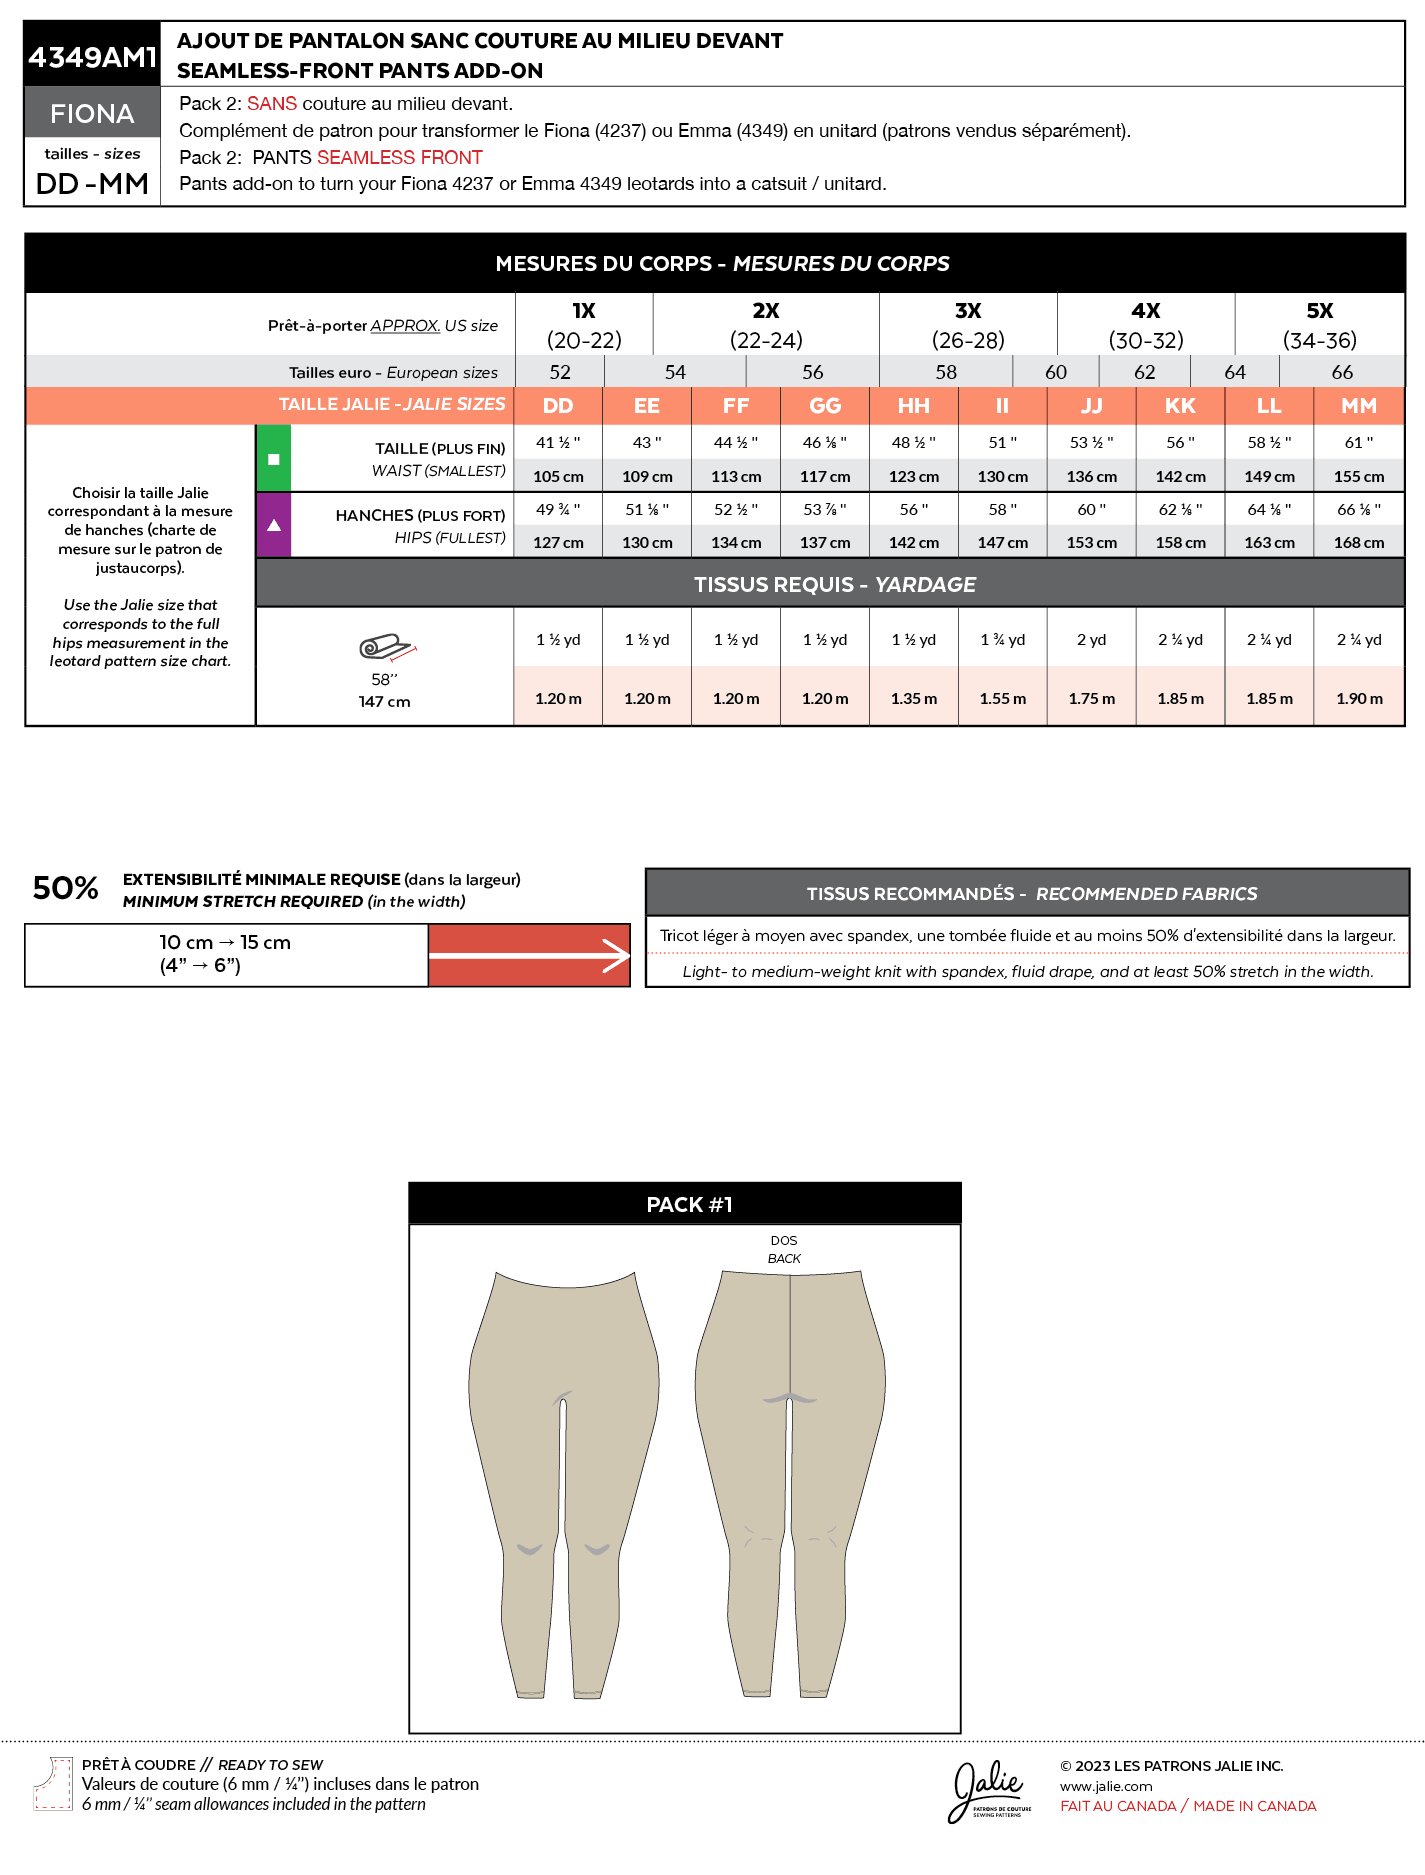 4349a // Pants add-ons for the FIONA and EMMA leotards - Jalie